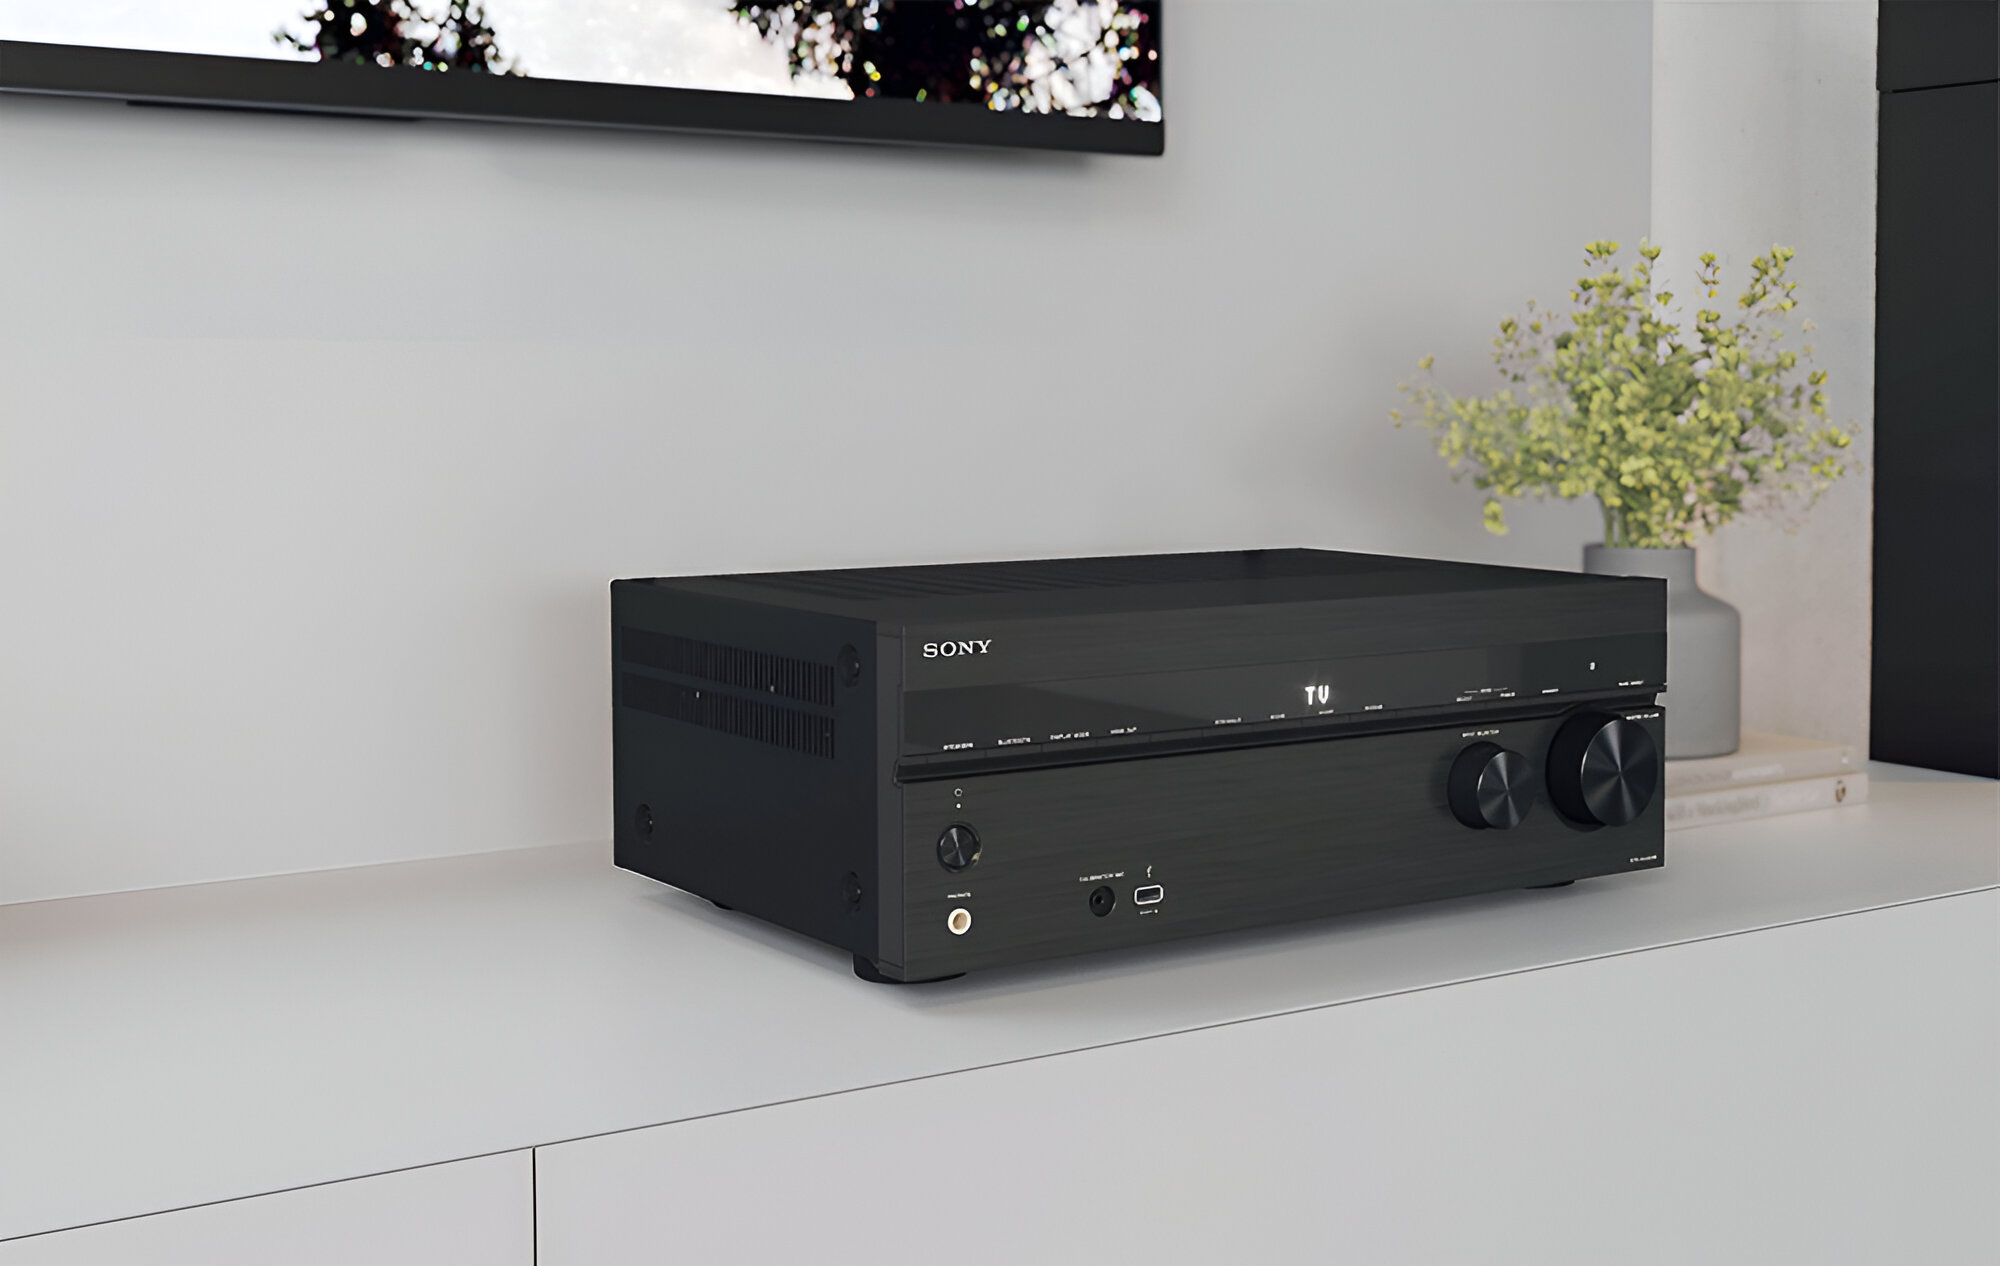 Which Sony AV Receiver Has A Programmable Display